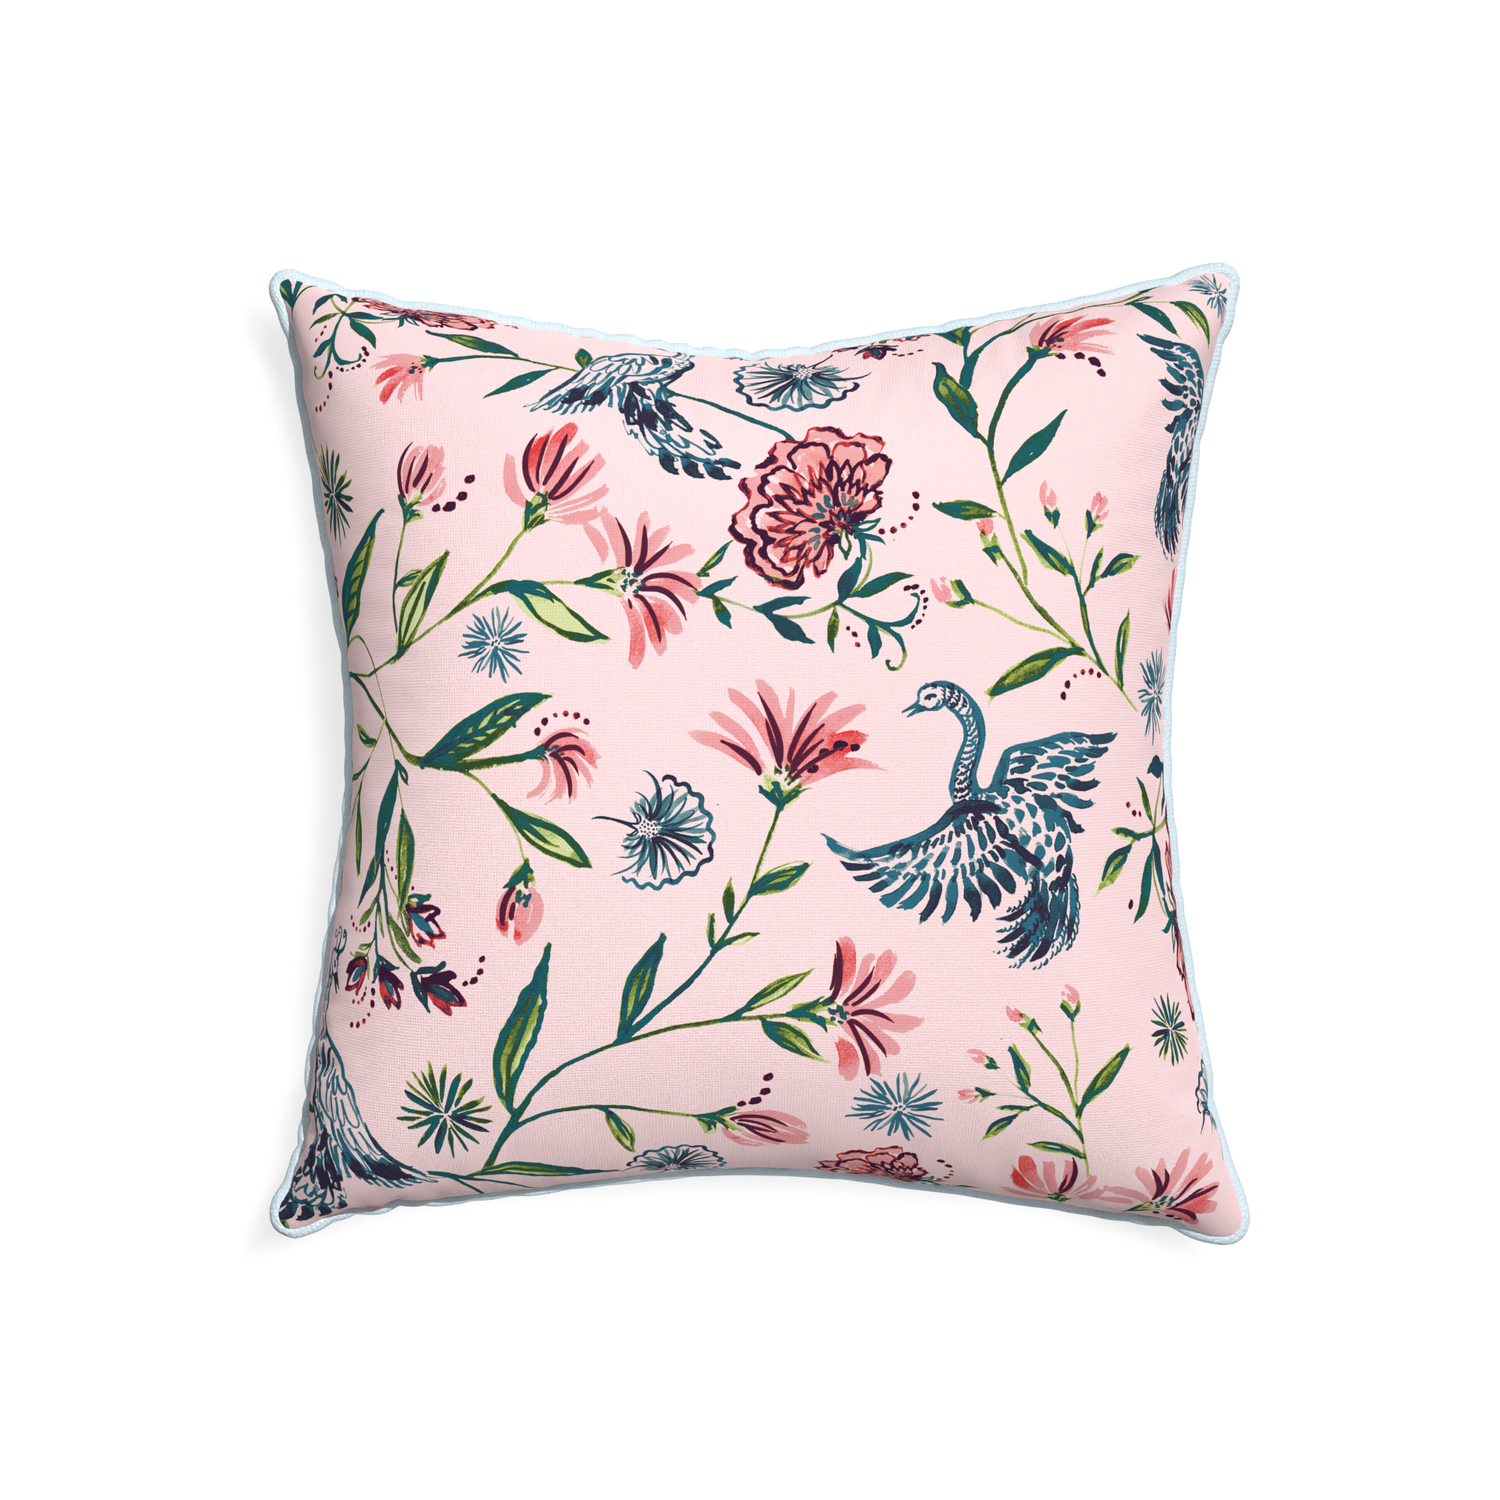 22-square daphne rose custom pillow with powder piping on white background